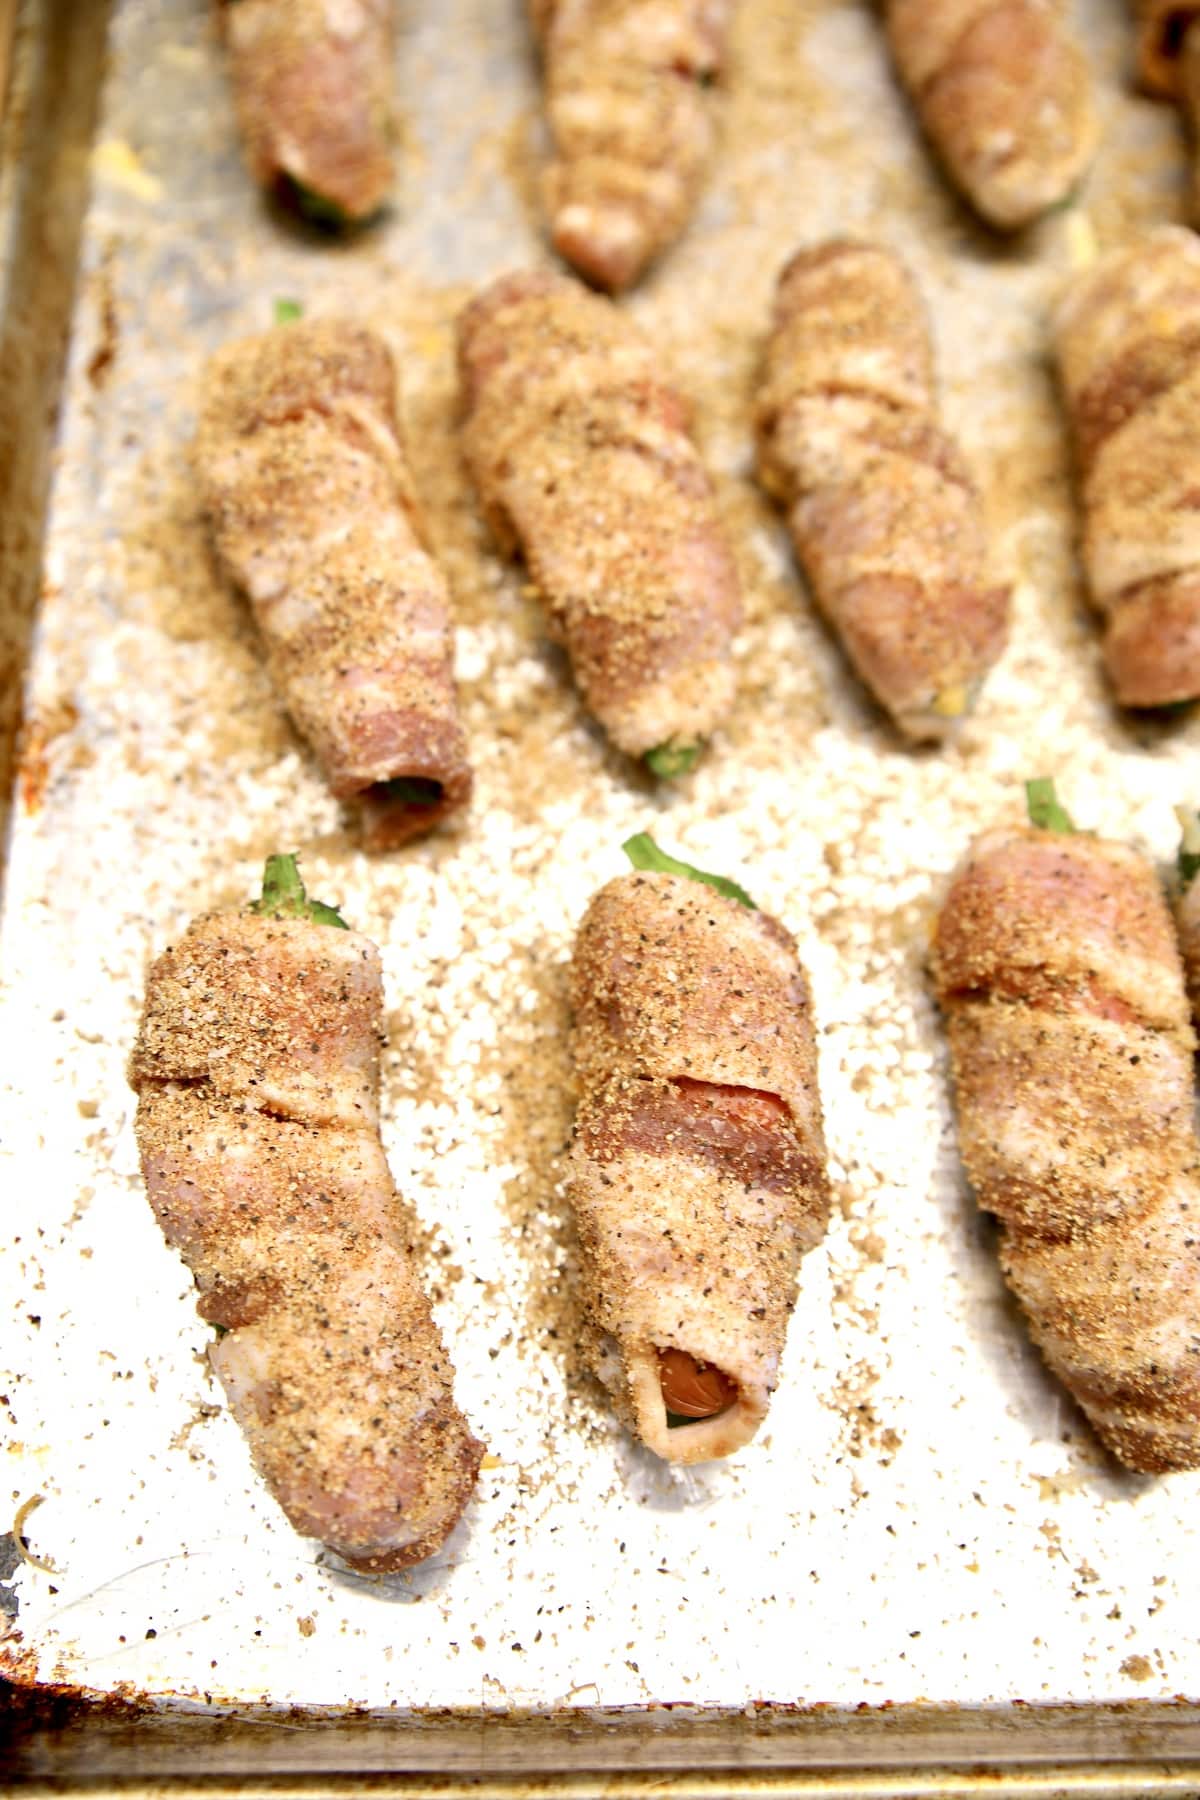 Uncooked jalapeño poppers wrapped in bacon with dry rub seasoning.